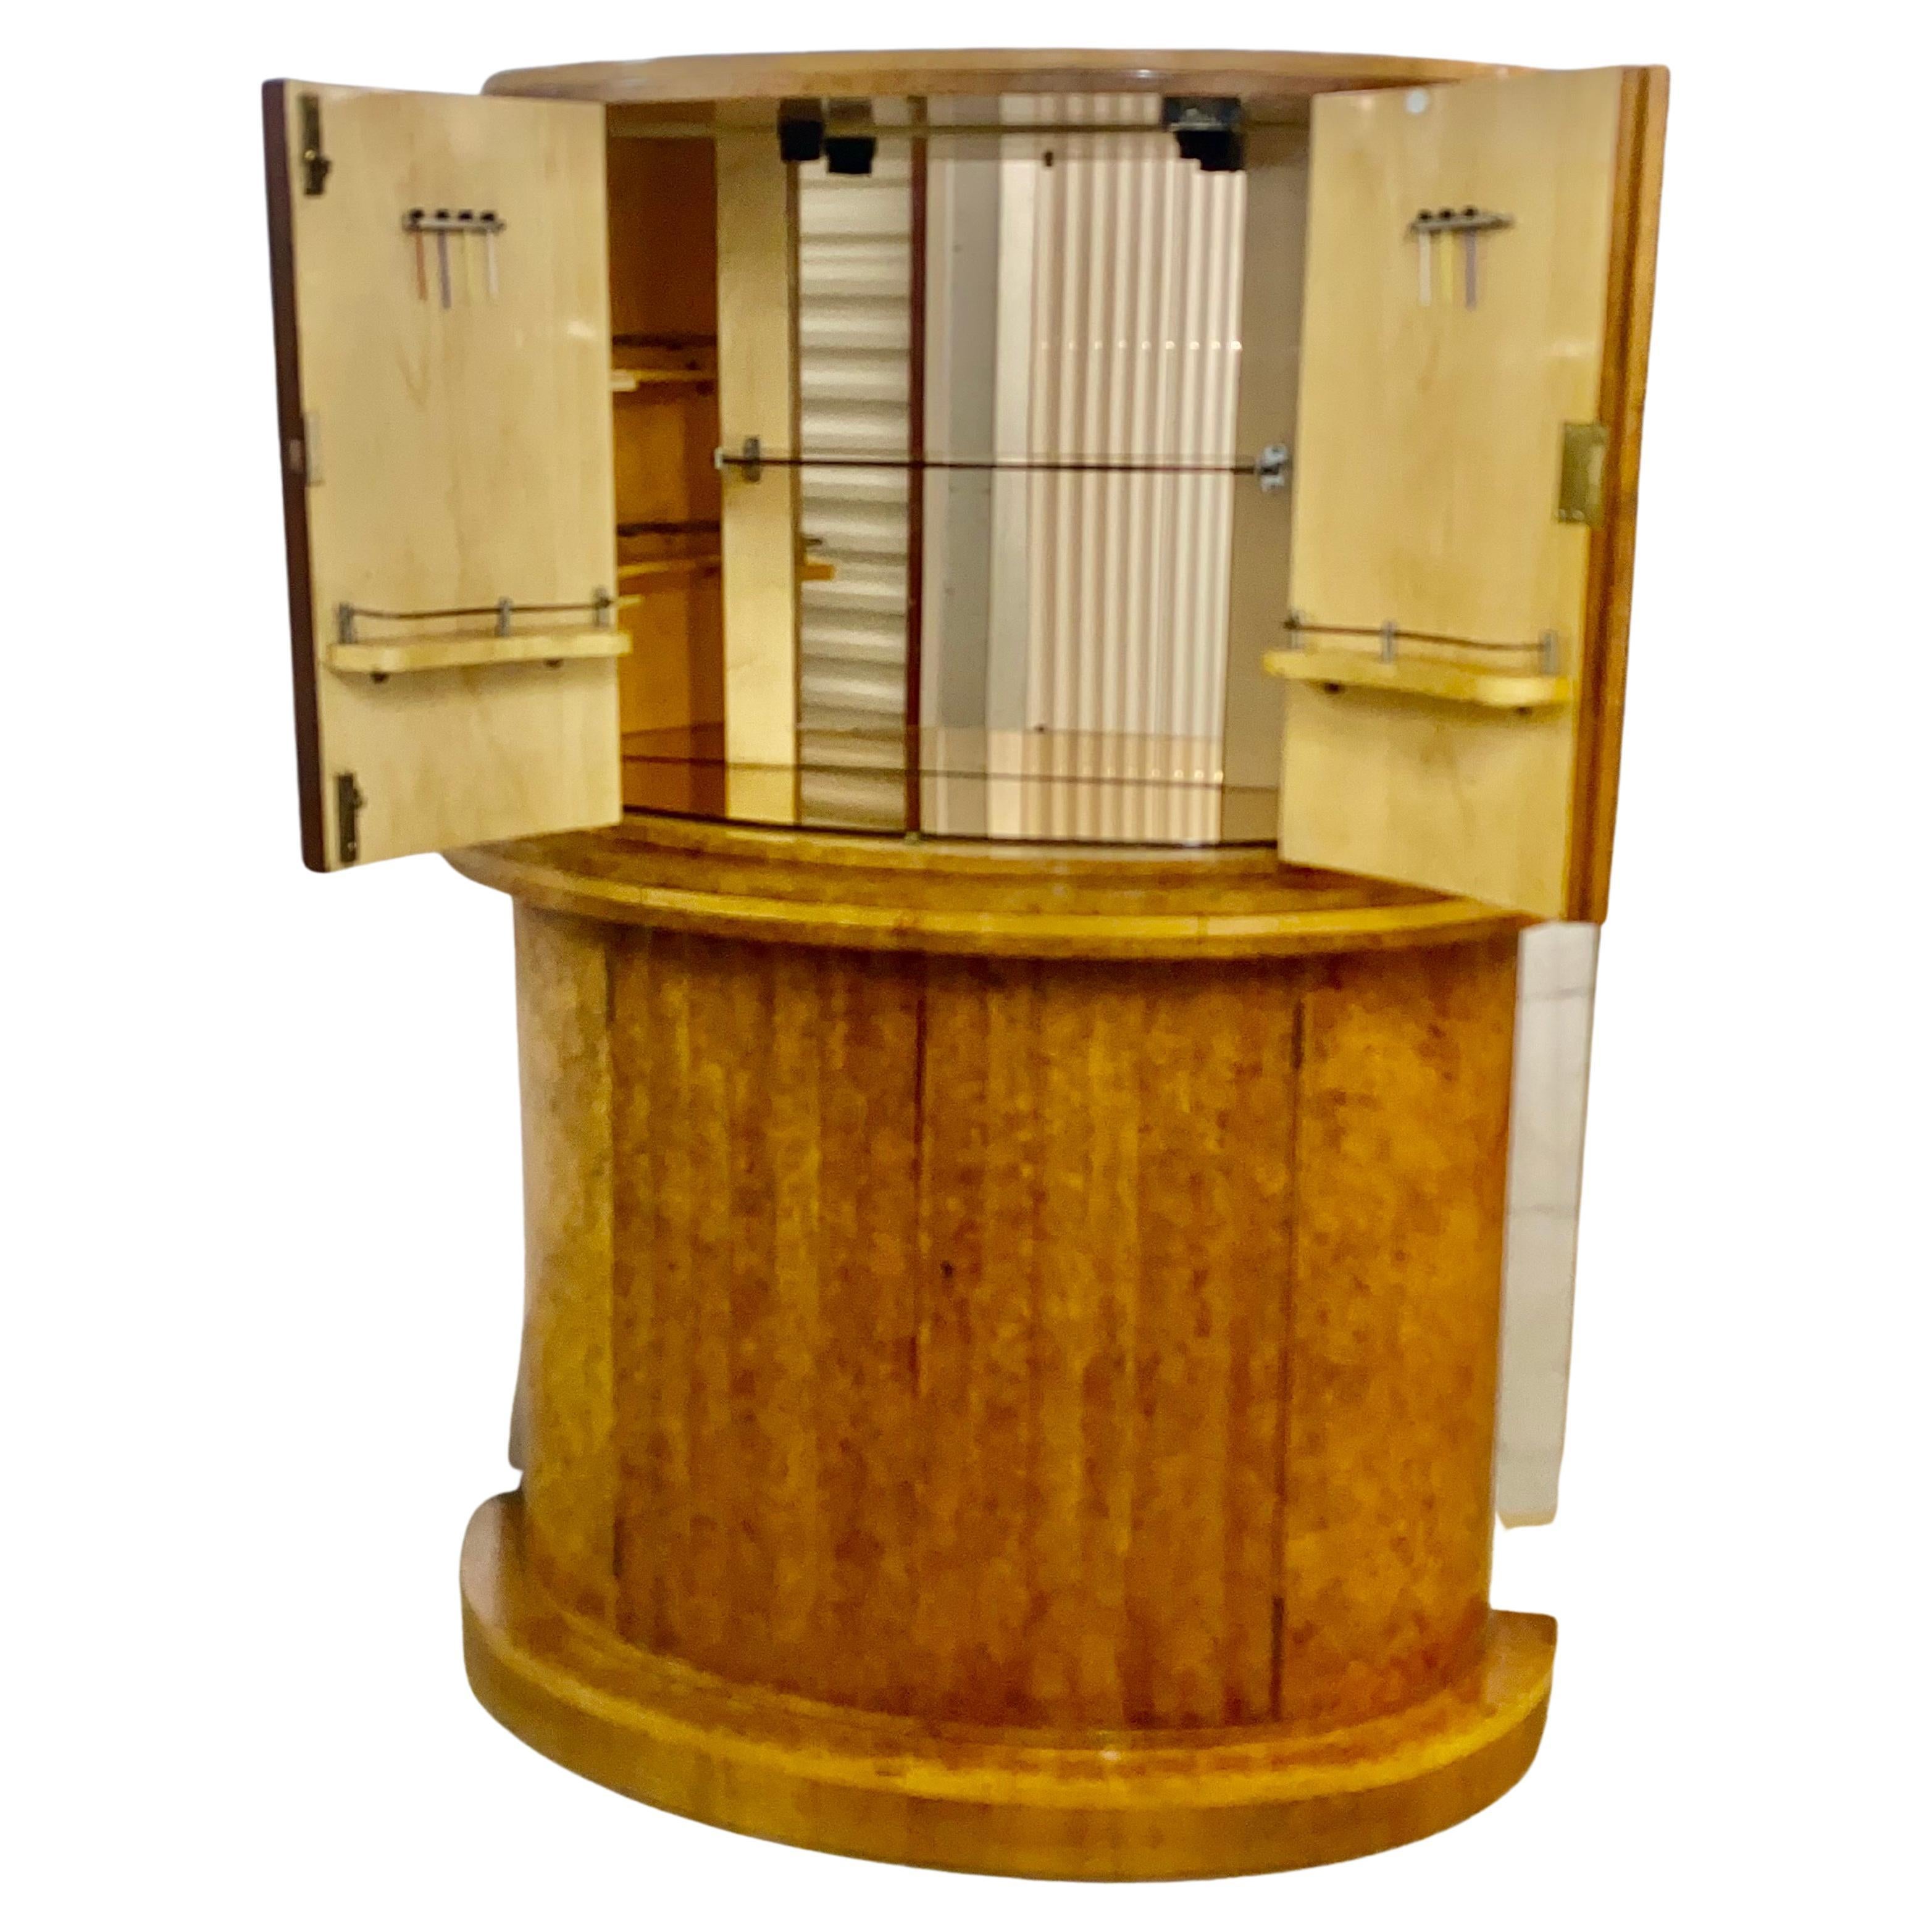  Art Deco Blonde Burl Maple Semi Circular Cocktail Cabinet Bar by H&L Epstein  For Sale 2